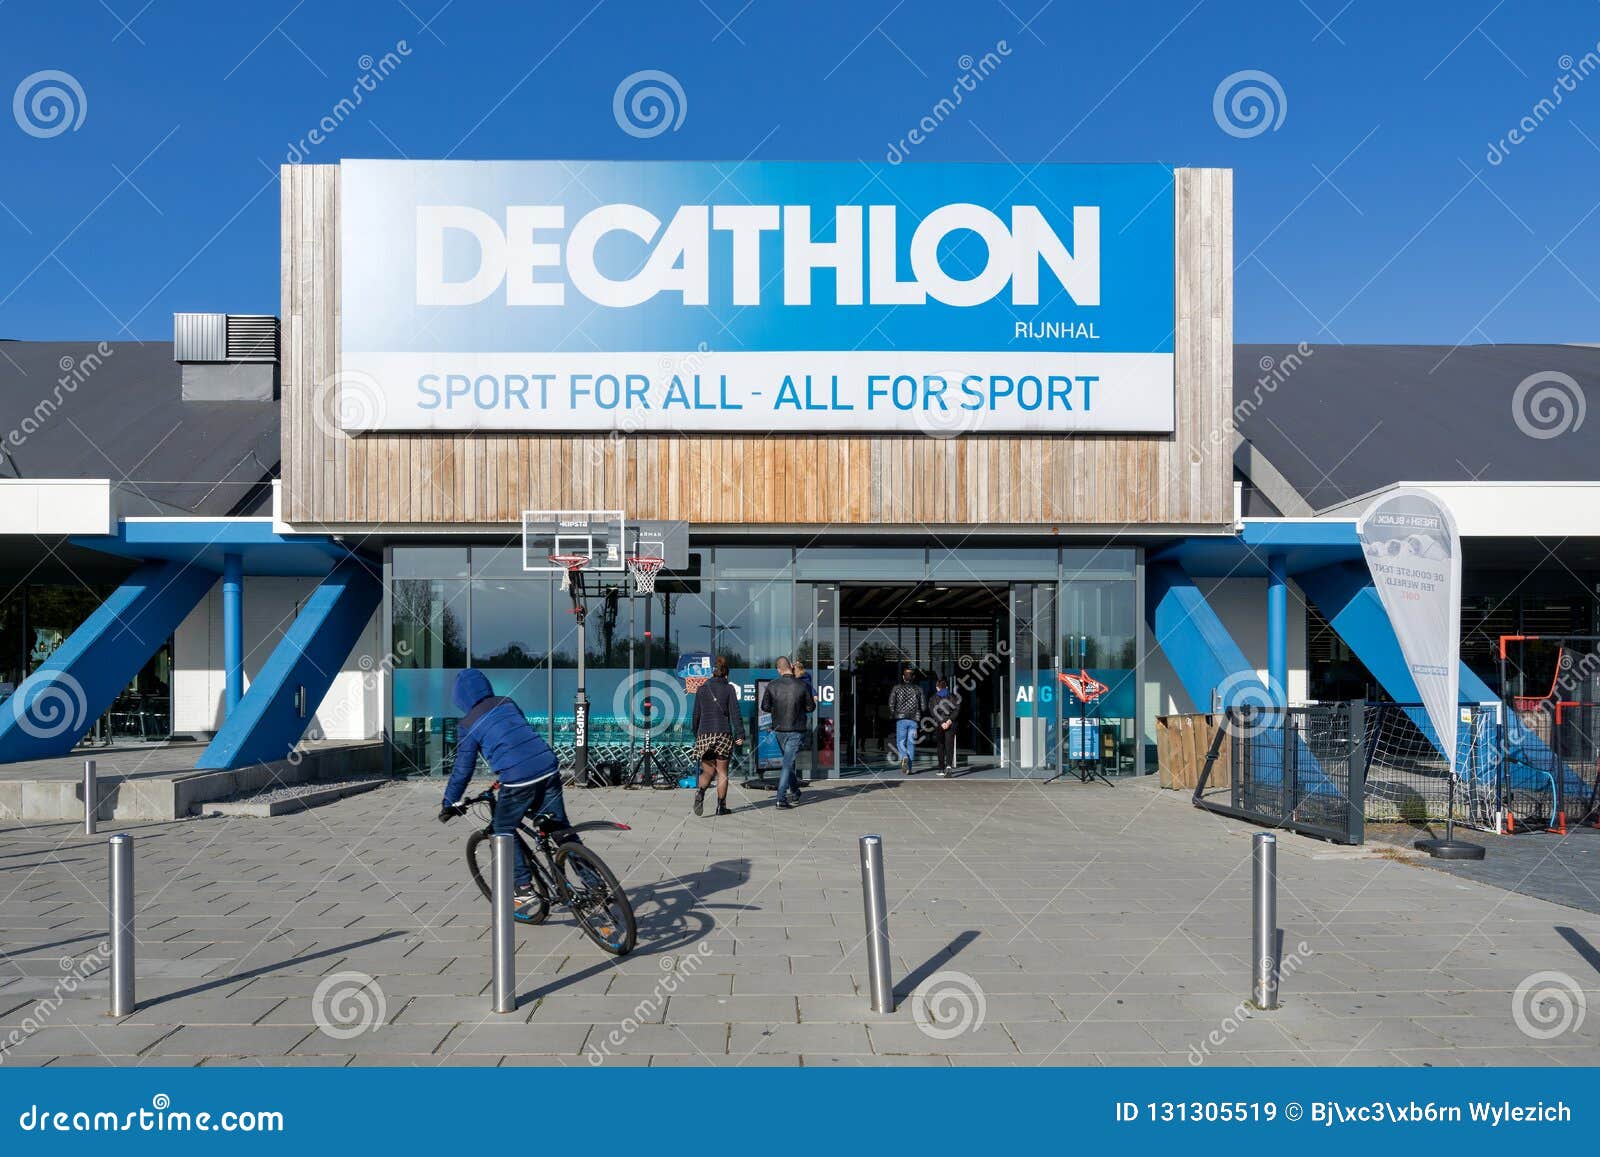 french sporting goods retailer